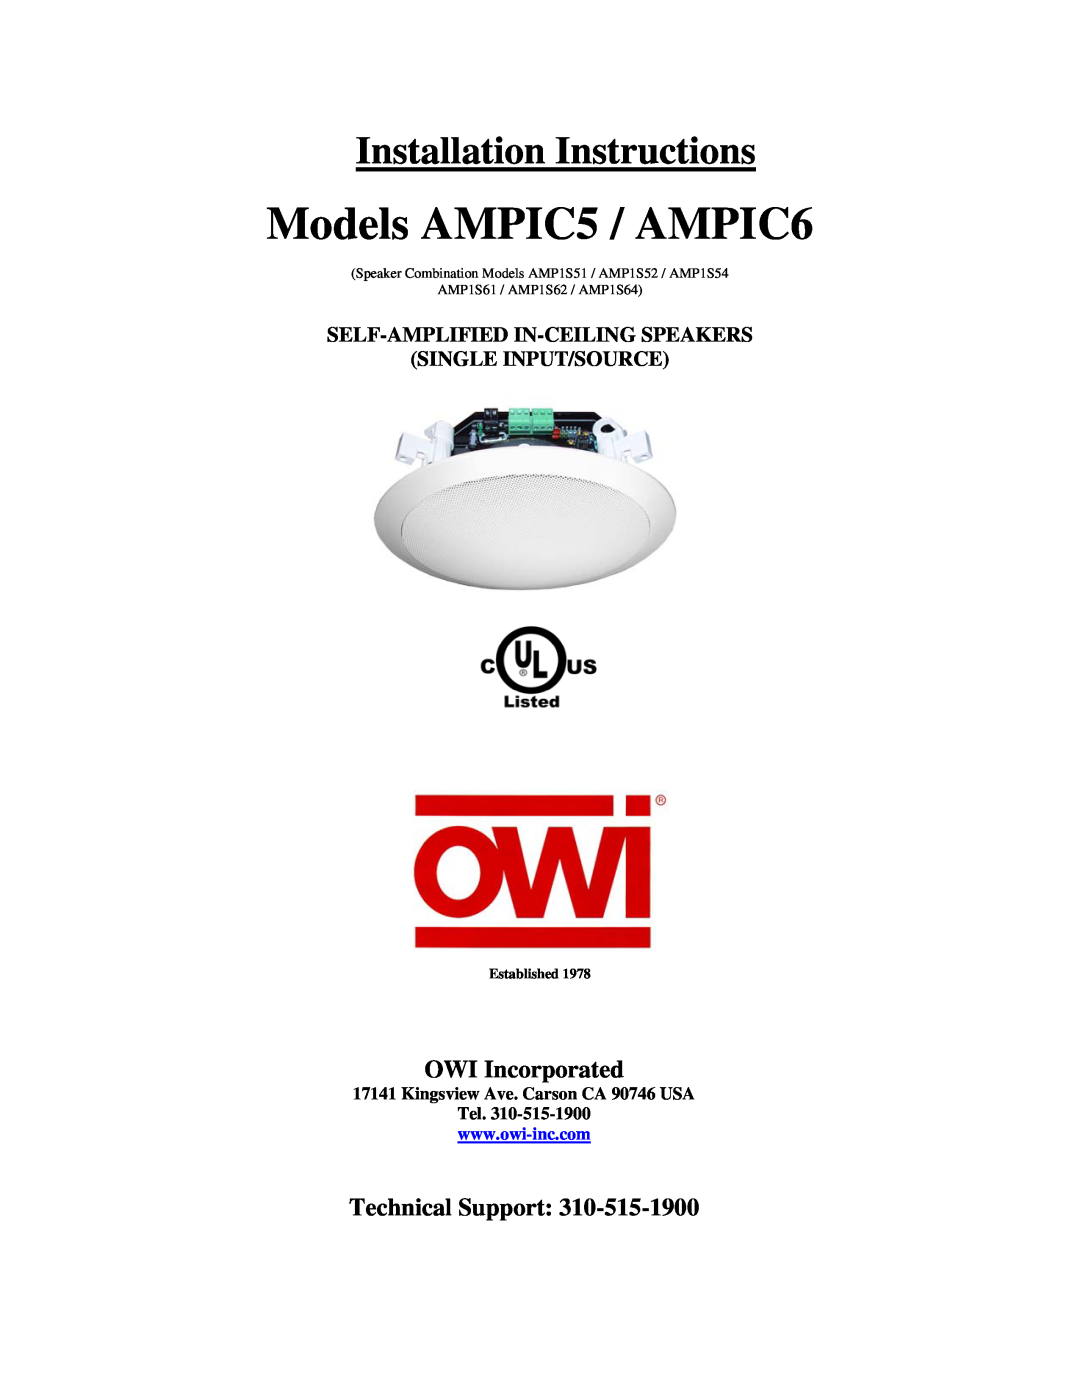 OWI AMP-IC6 installation instructions OWI Incorporated, Technical Support, Models AMPIC5 / AMPIC6, Single Input/Source 